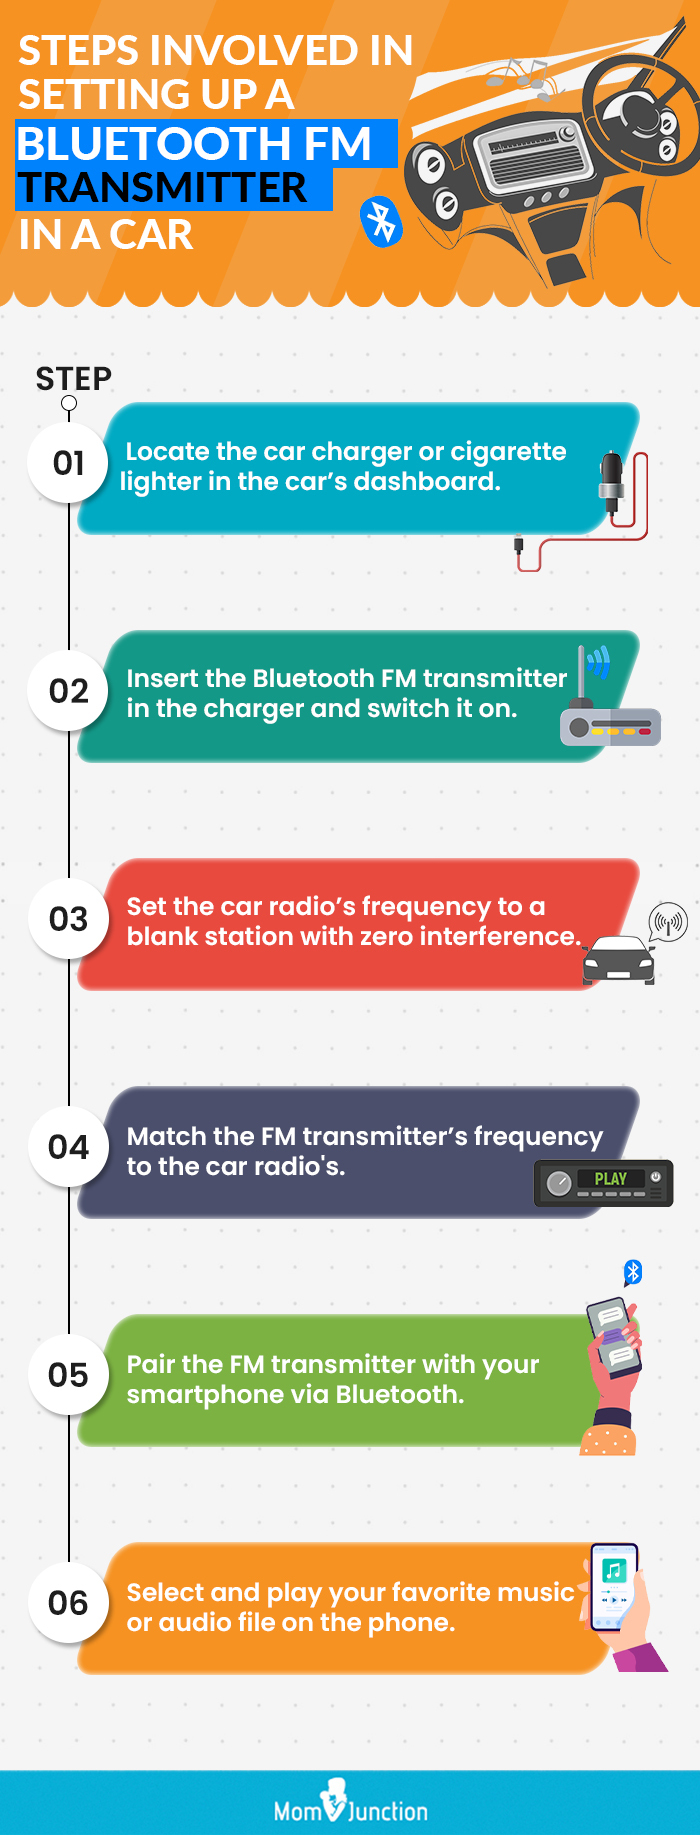 Steps Involved In Setting Up A Bluetooth FM Transmitter In A Car (infographic)